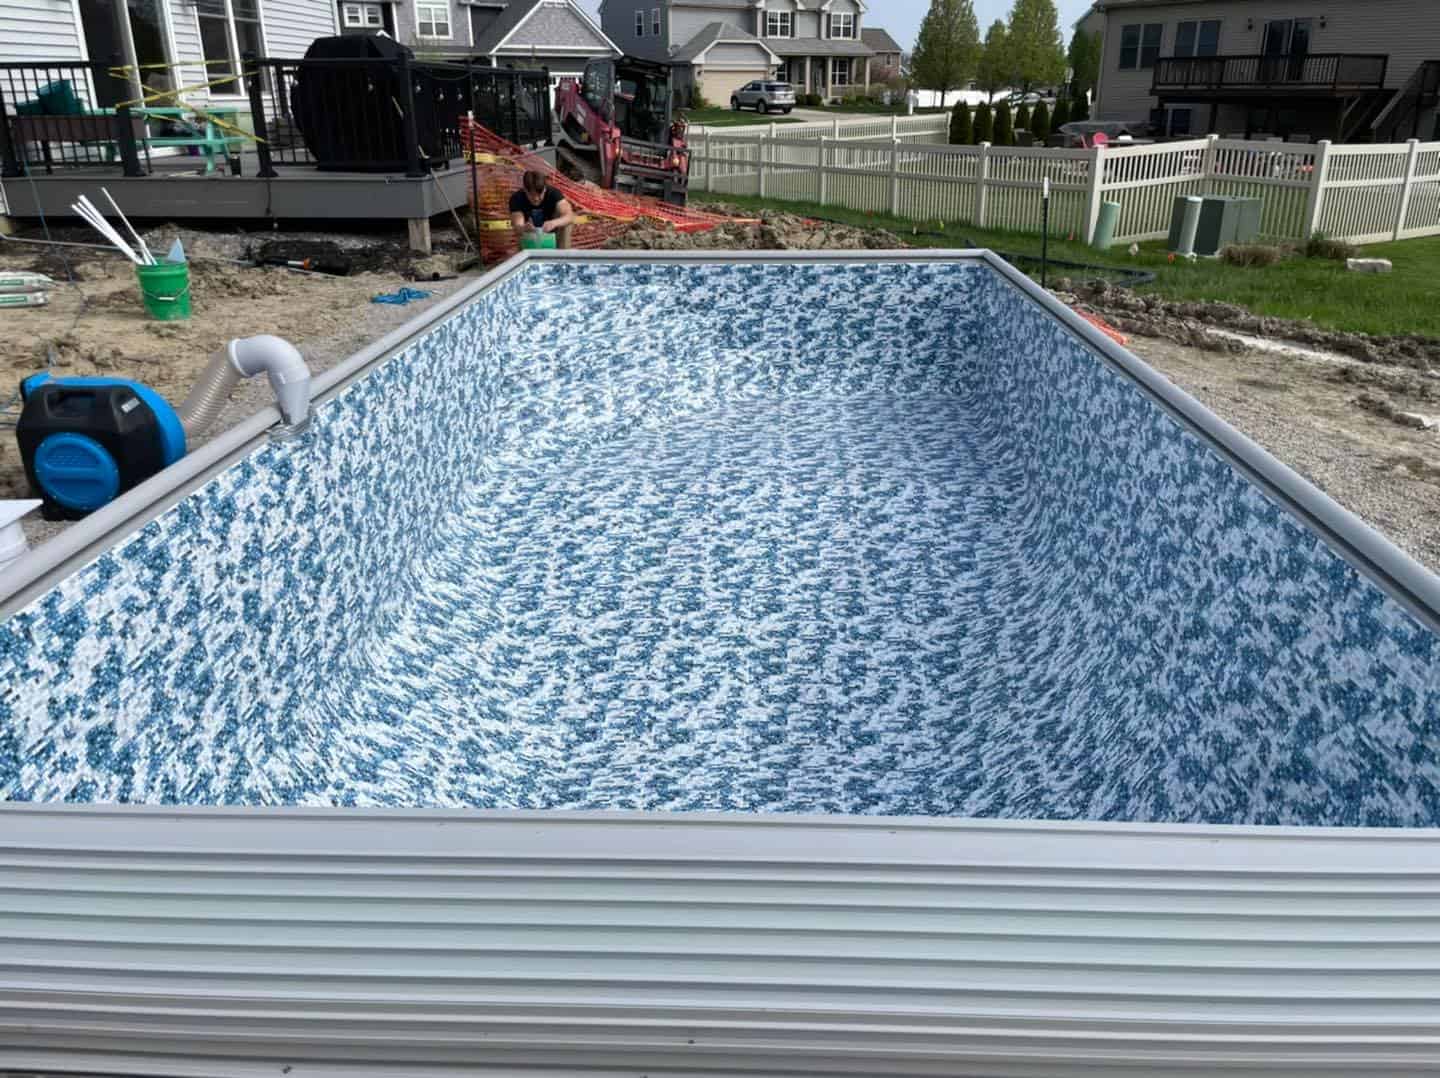 A swimming pool being built in a backyard.